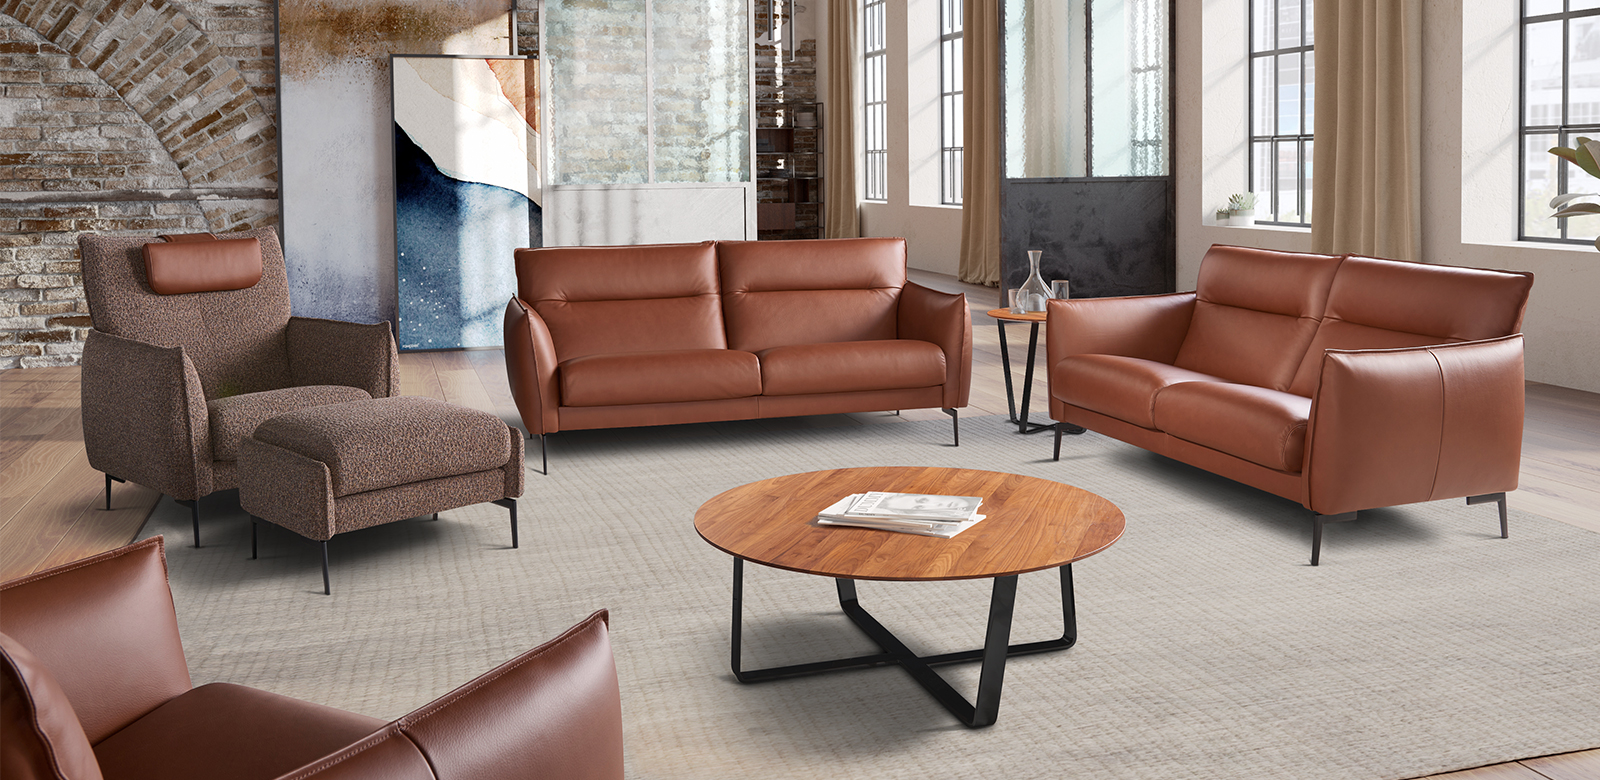 Ancona sofa in brown leather with Riva armchair in brown fabric.